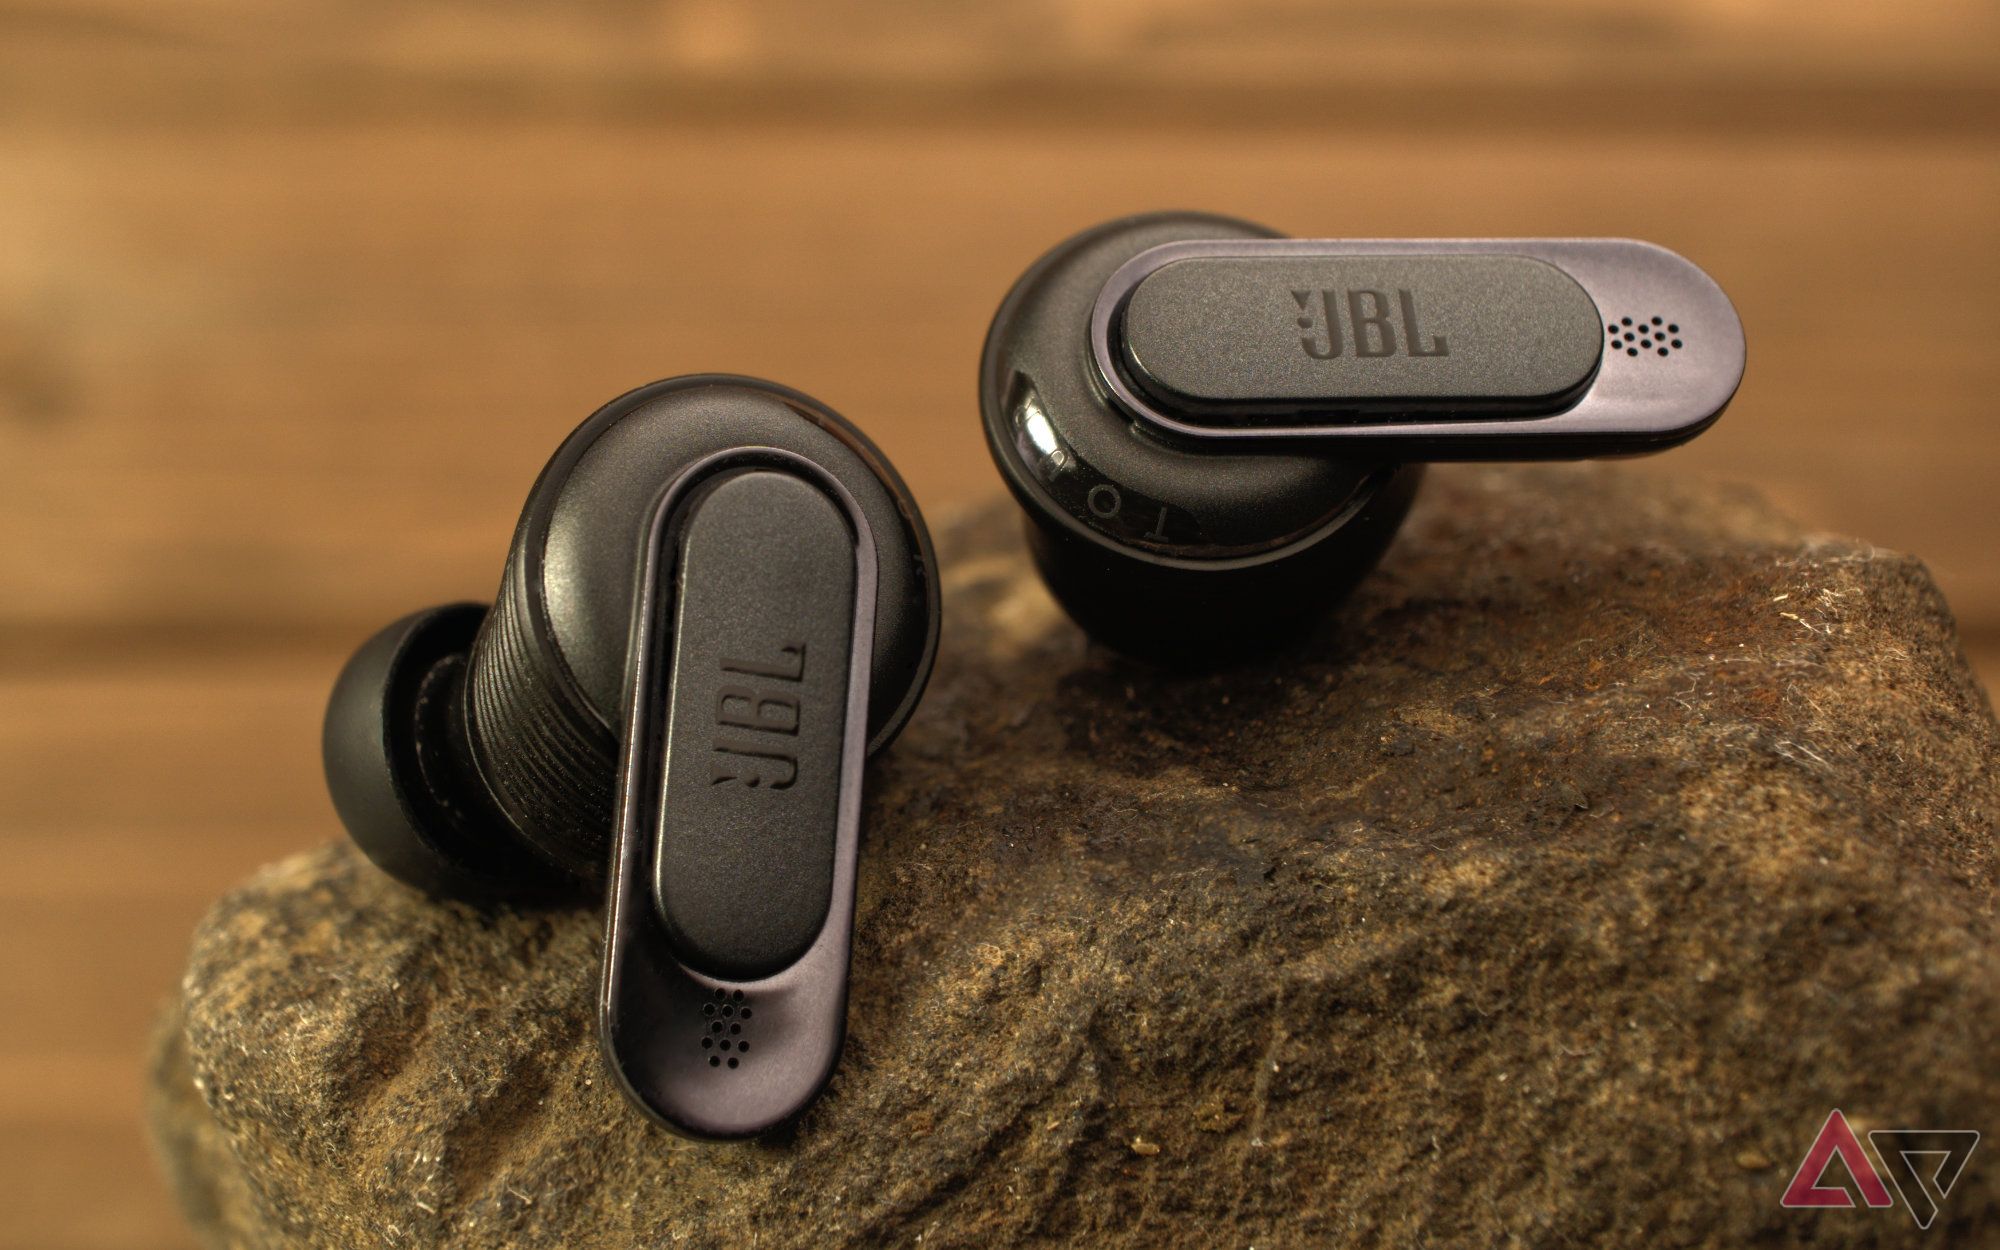 JBL Tour Pro 2 review: These earbuds have their own screen